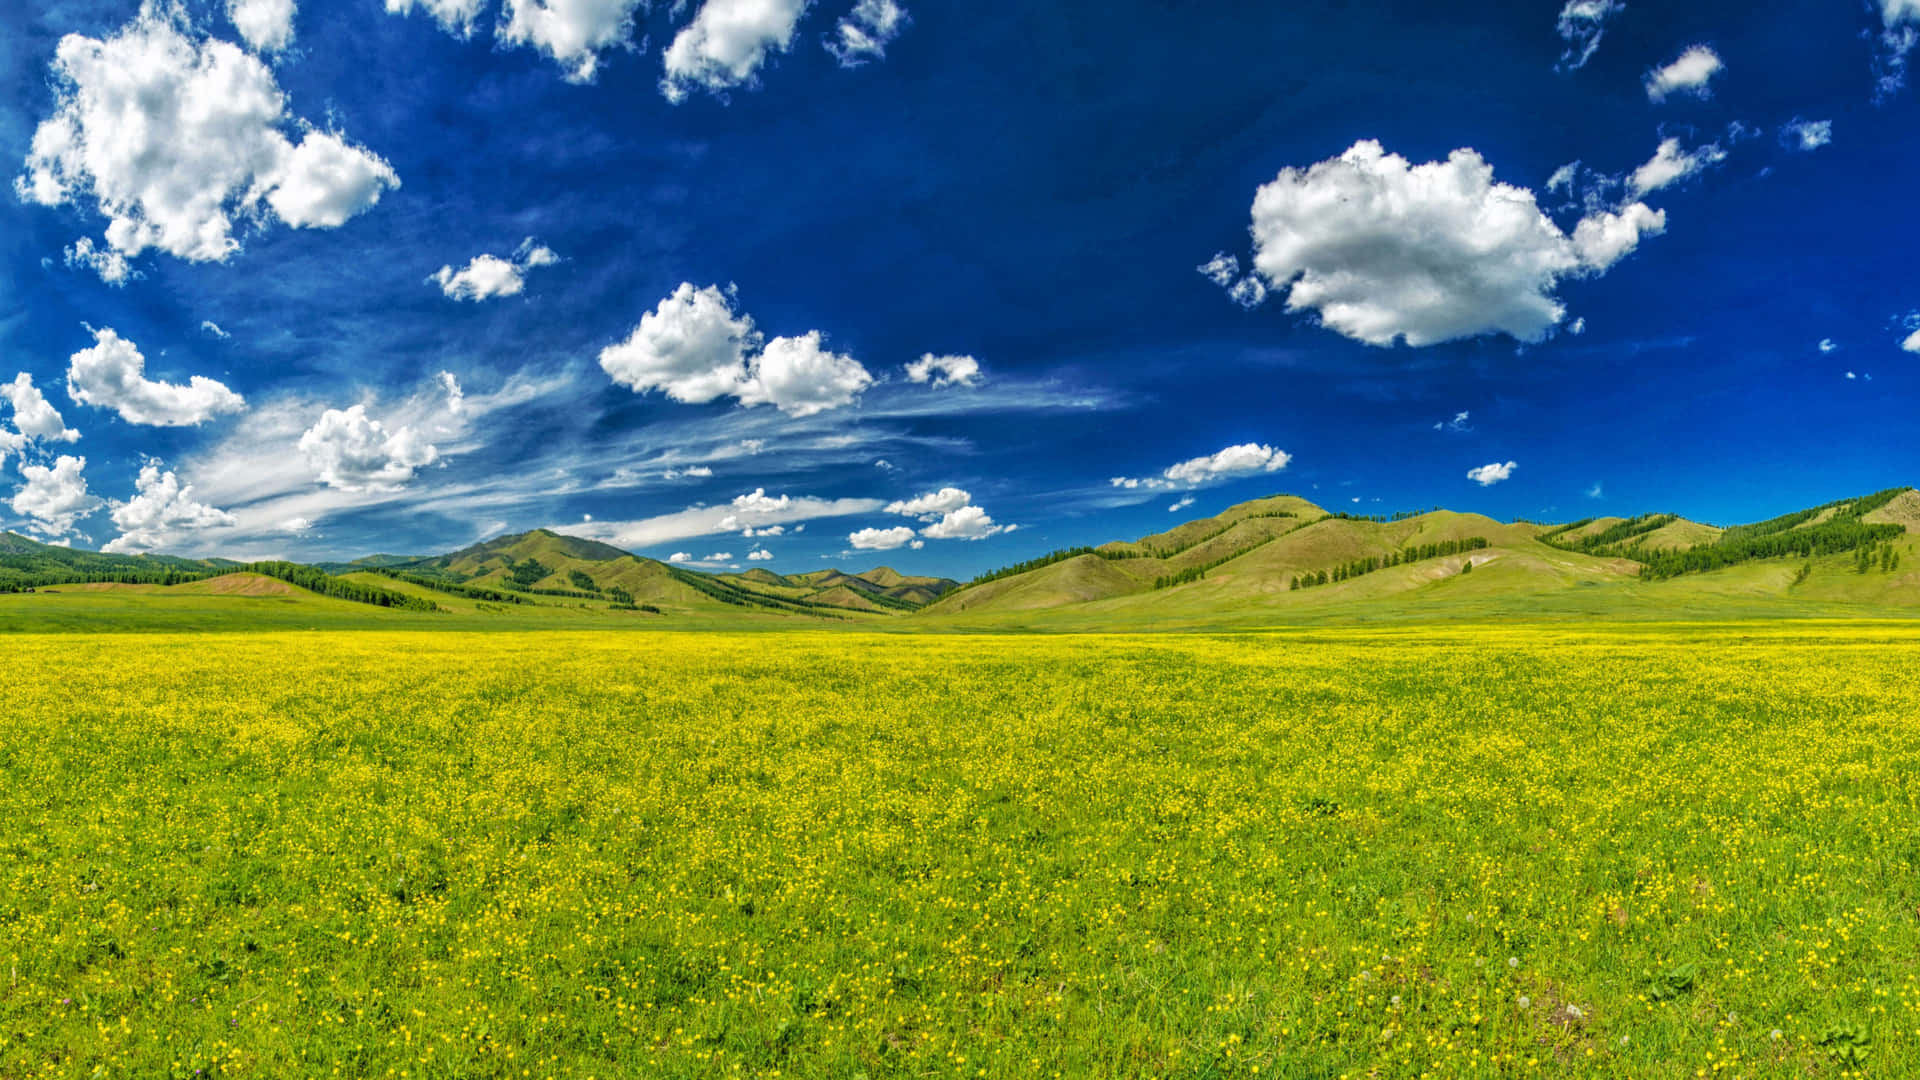 A Field Of Yellow Flowers With Clouds In The Sky